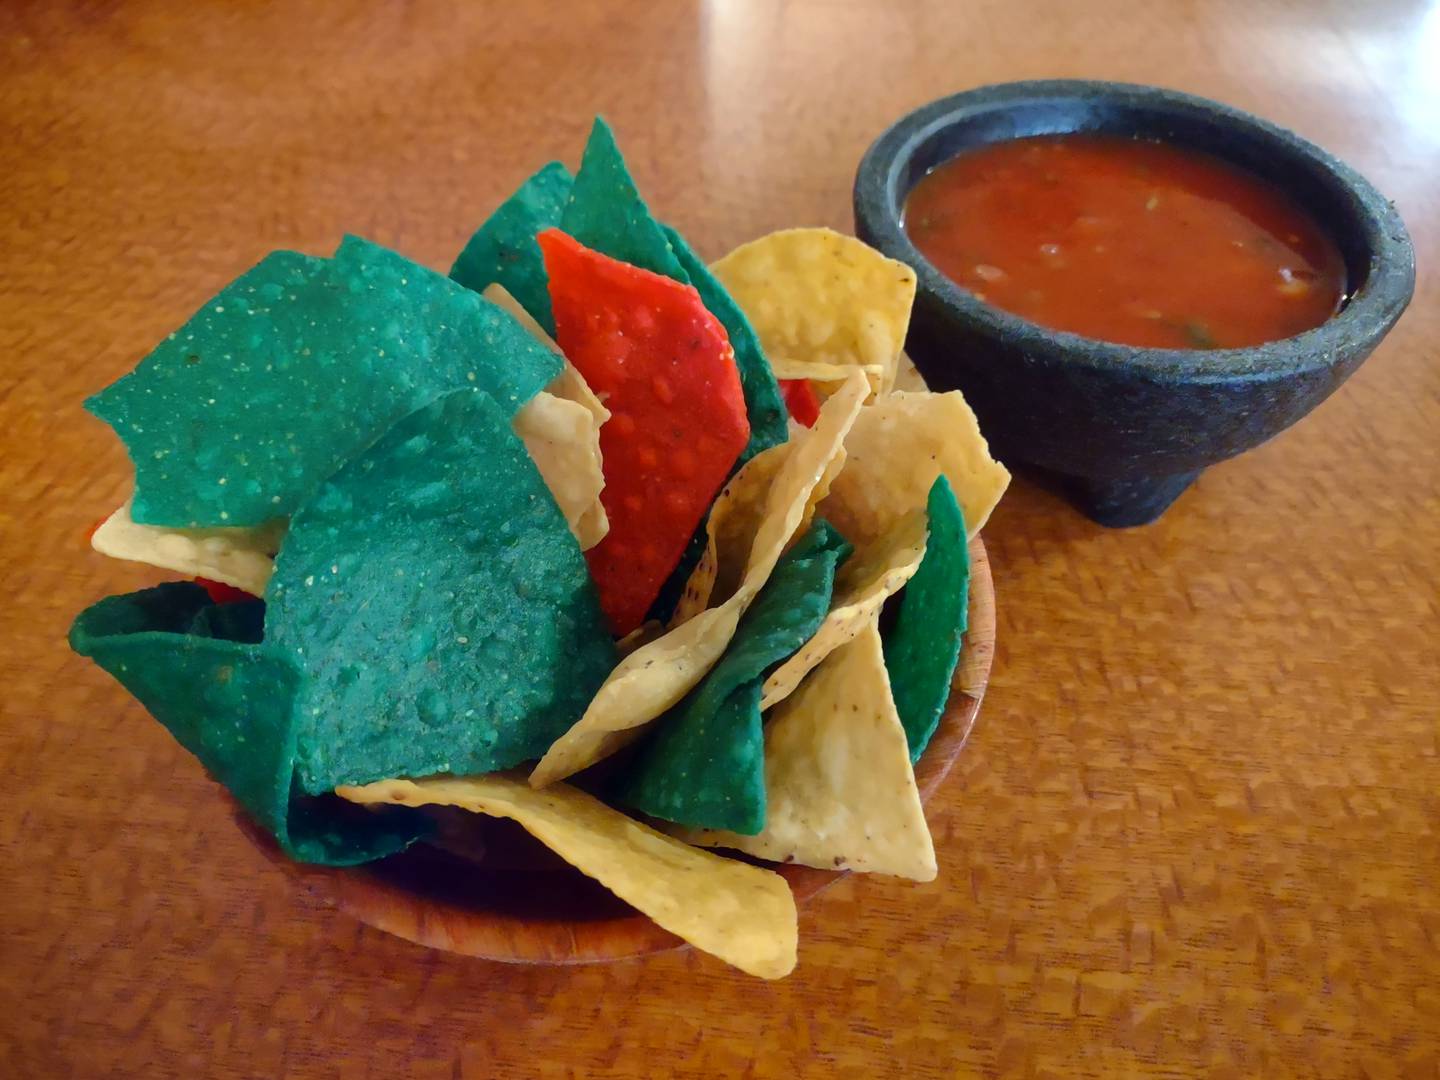 The chips were the colors of the Mexican flag at Mr. Salsas in Oglesby.